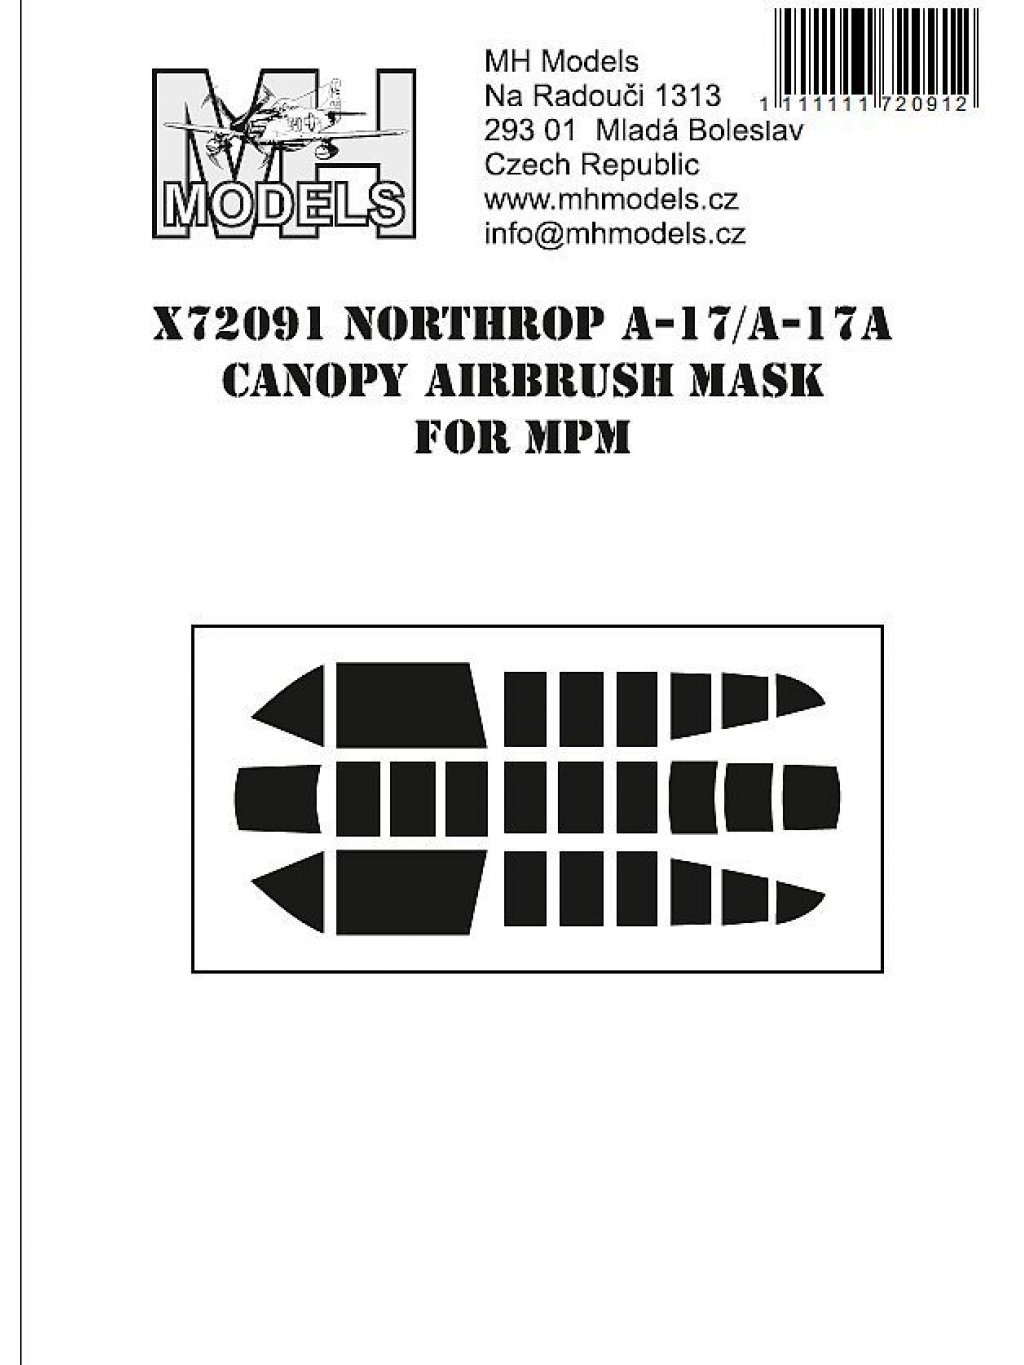 Nothrop A-17/A-17A Canopy airbrush mask for MPM